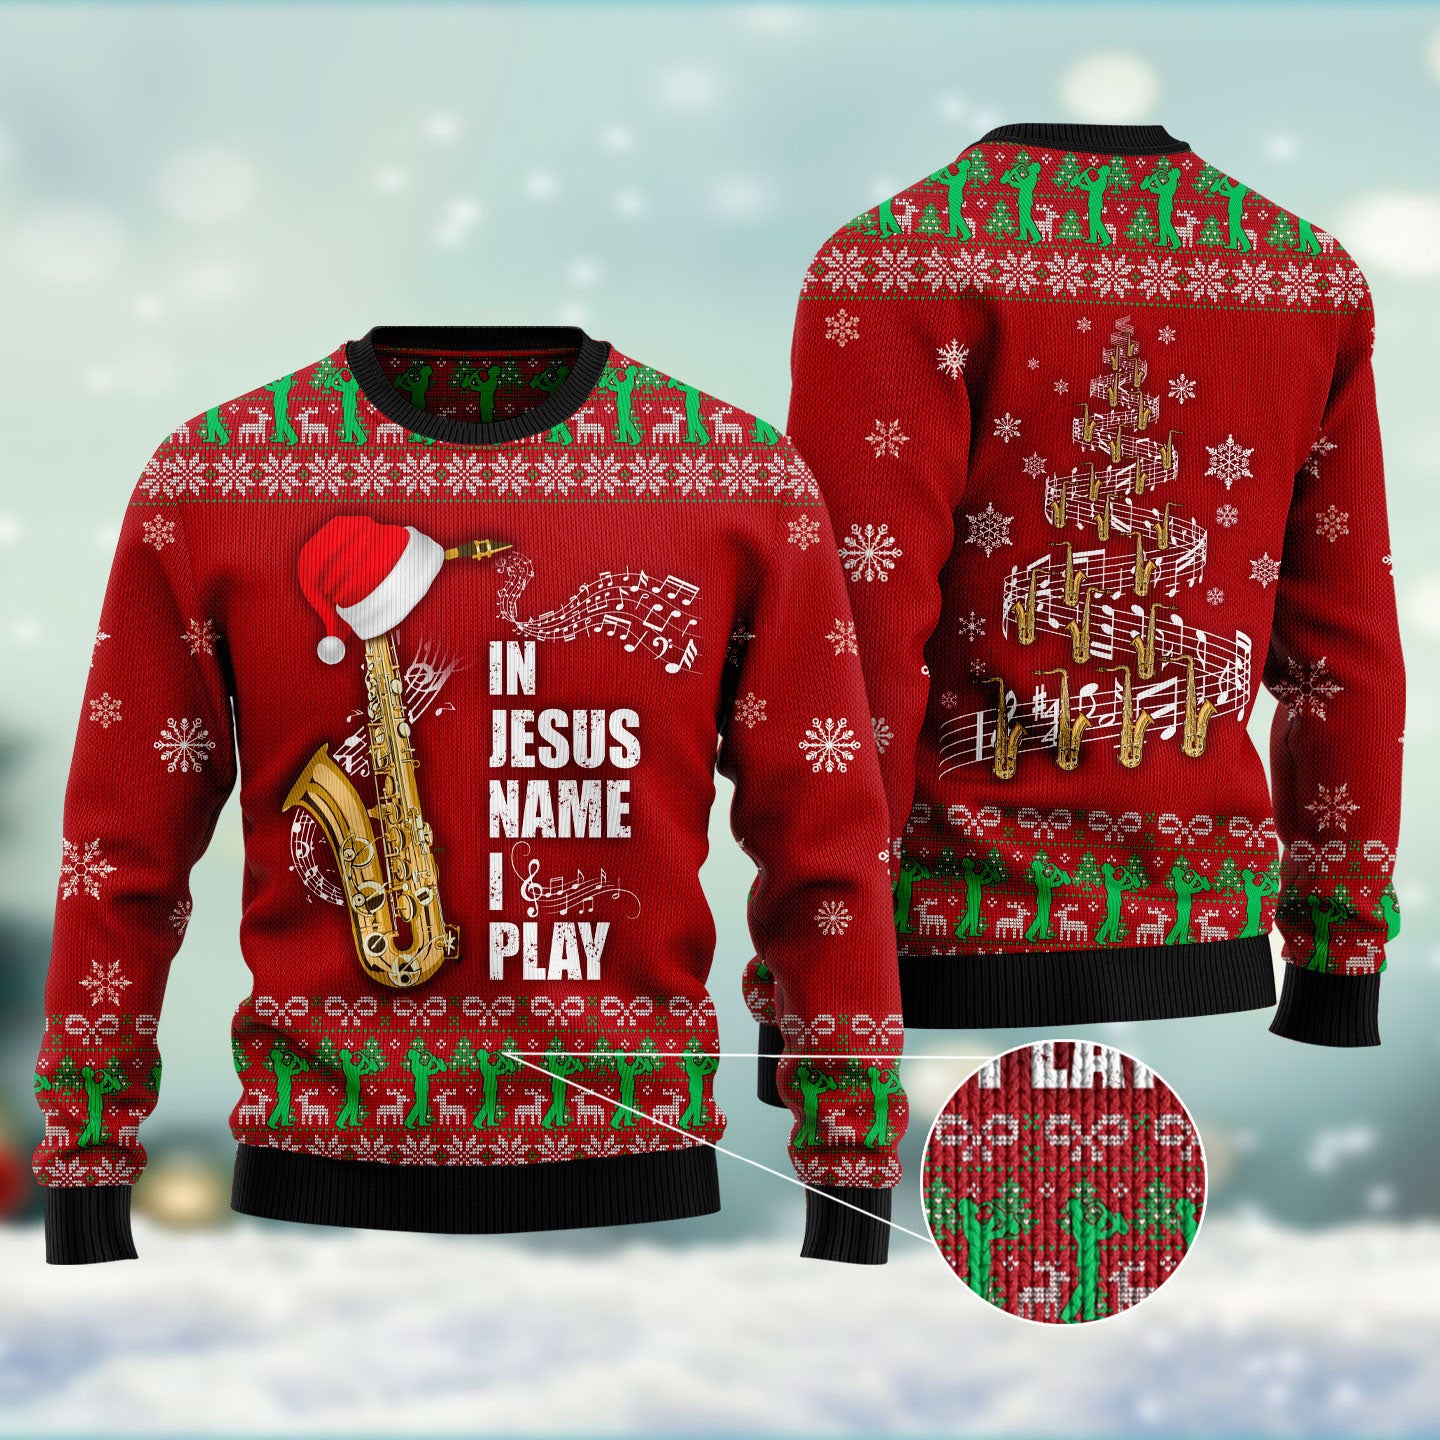 In Jesus Name I Play Saxophone Ugly Christmas Sweater - Xmas Gifts For Him Or Her - Christmas Gift For Friends - Jesus Christ Sweater